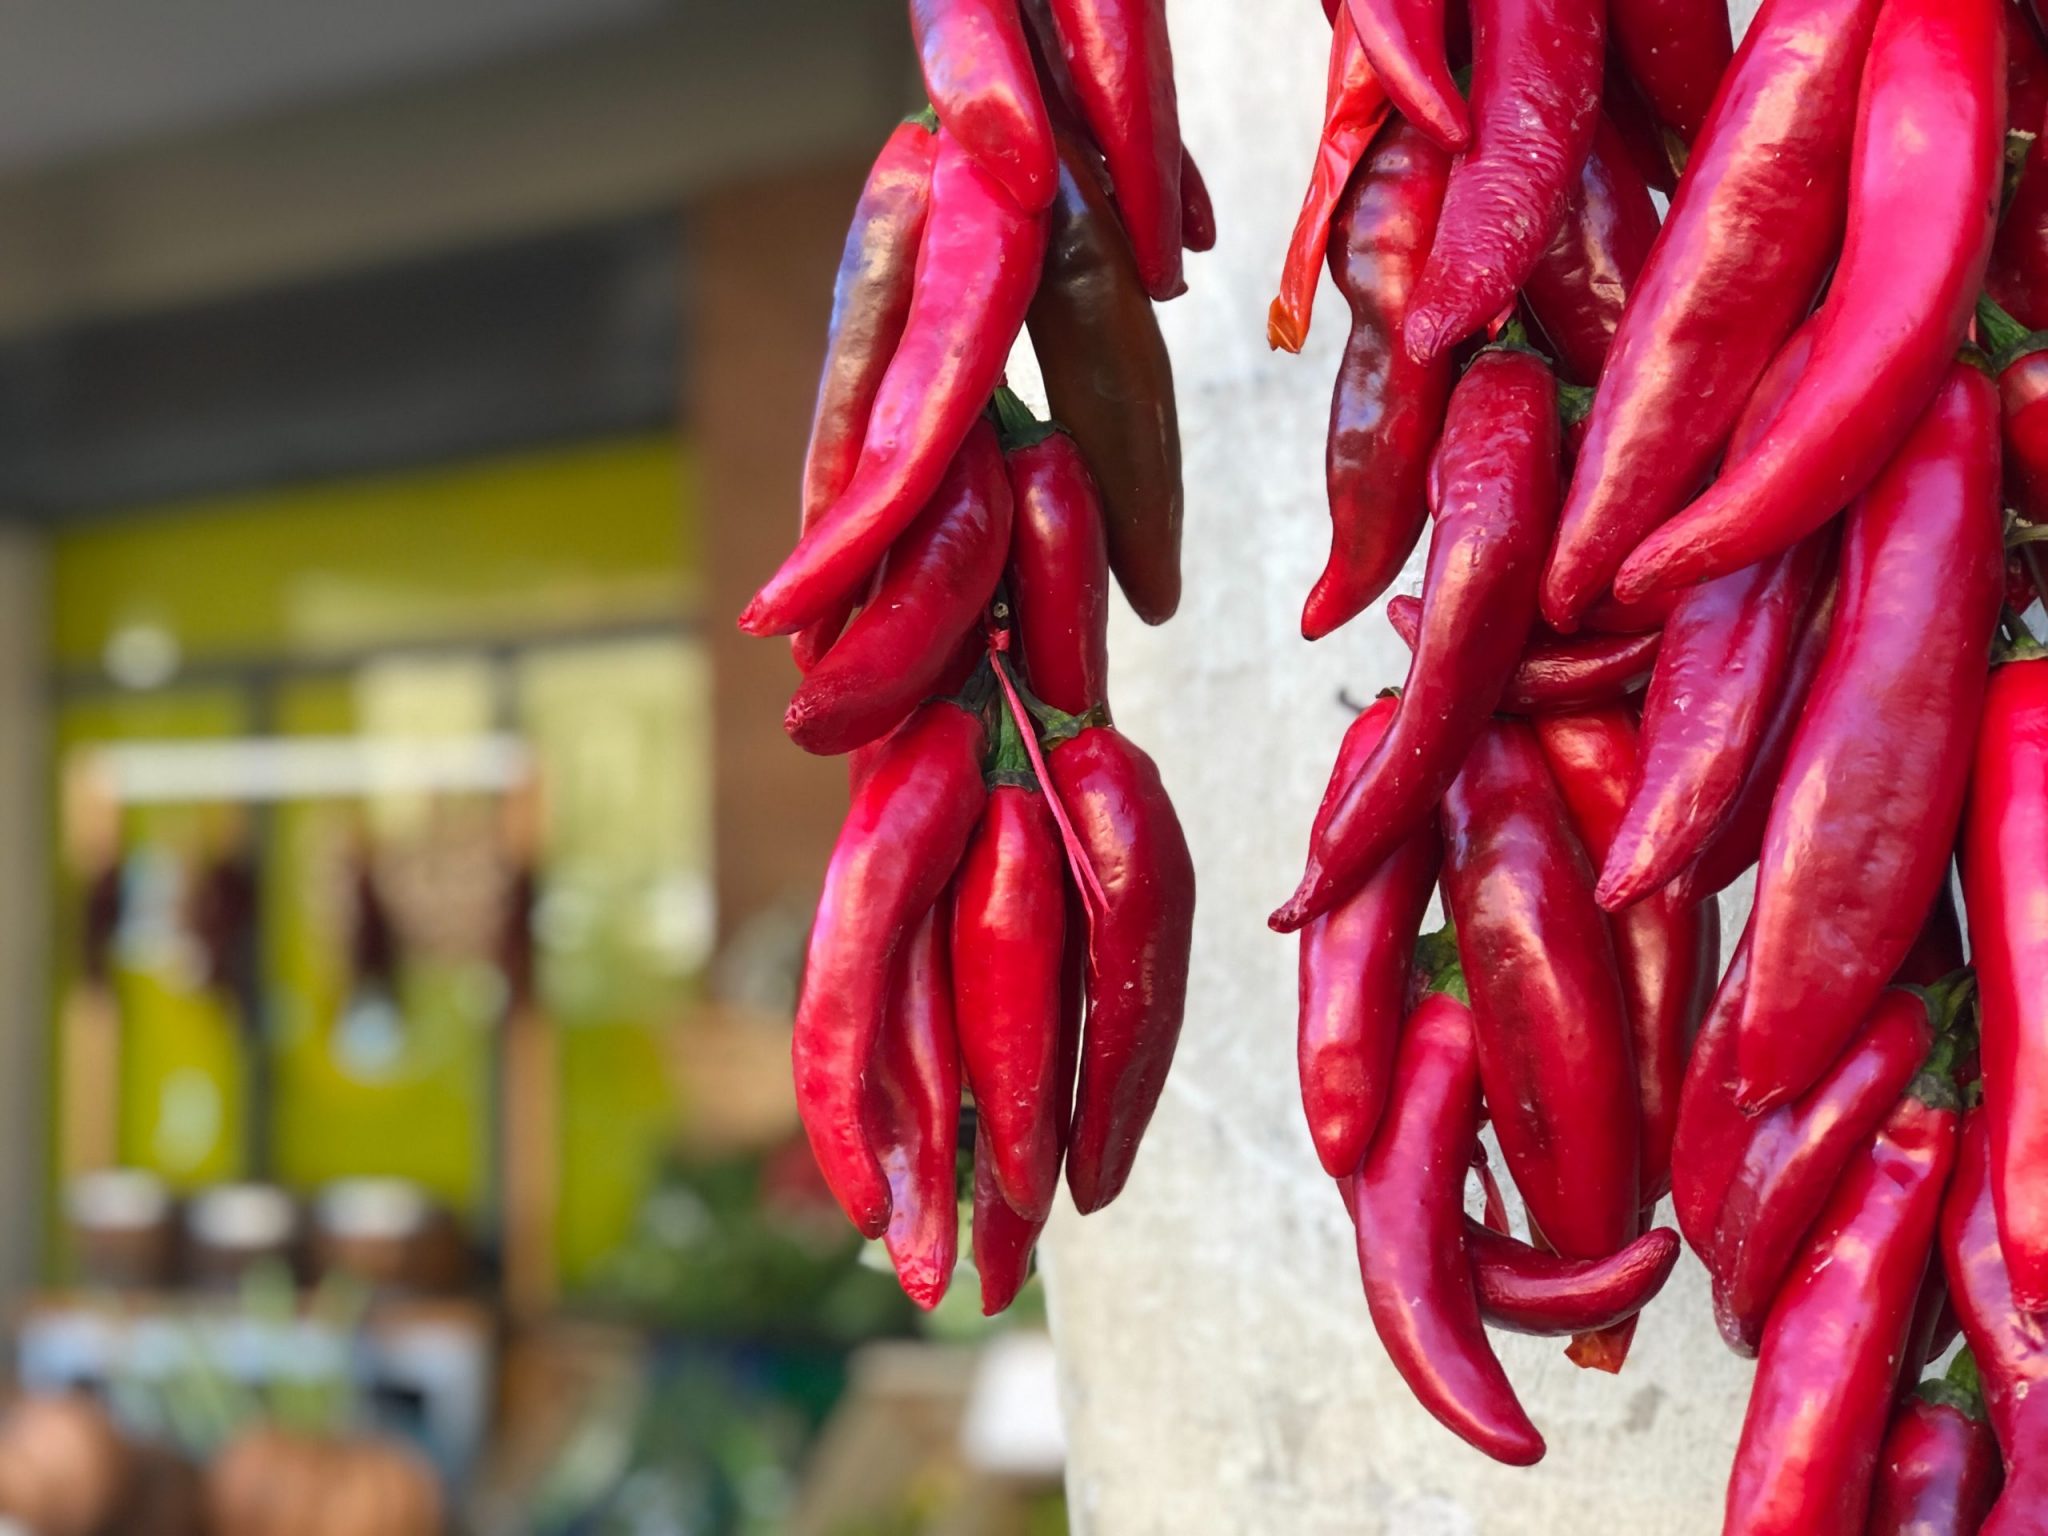 A photo of chilis from Sicily